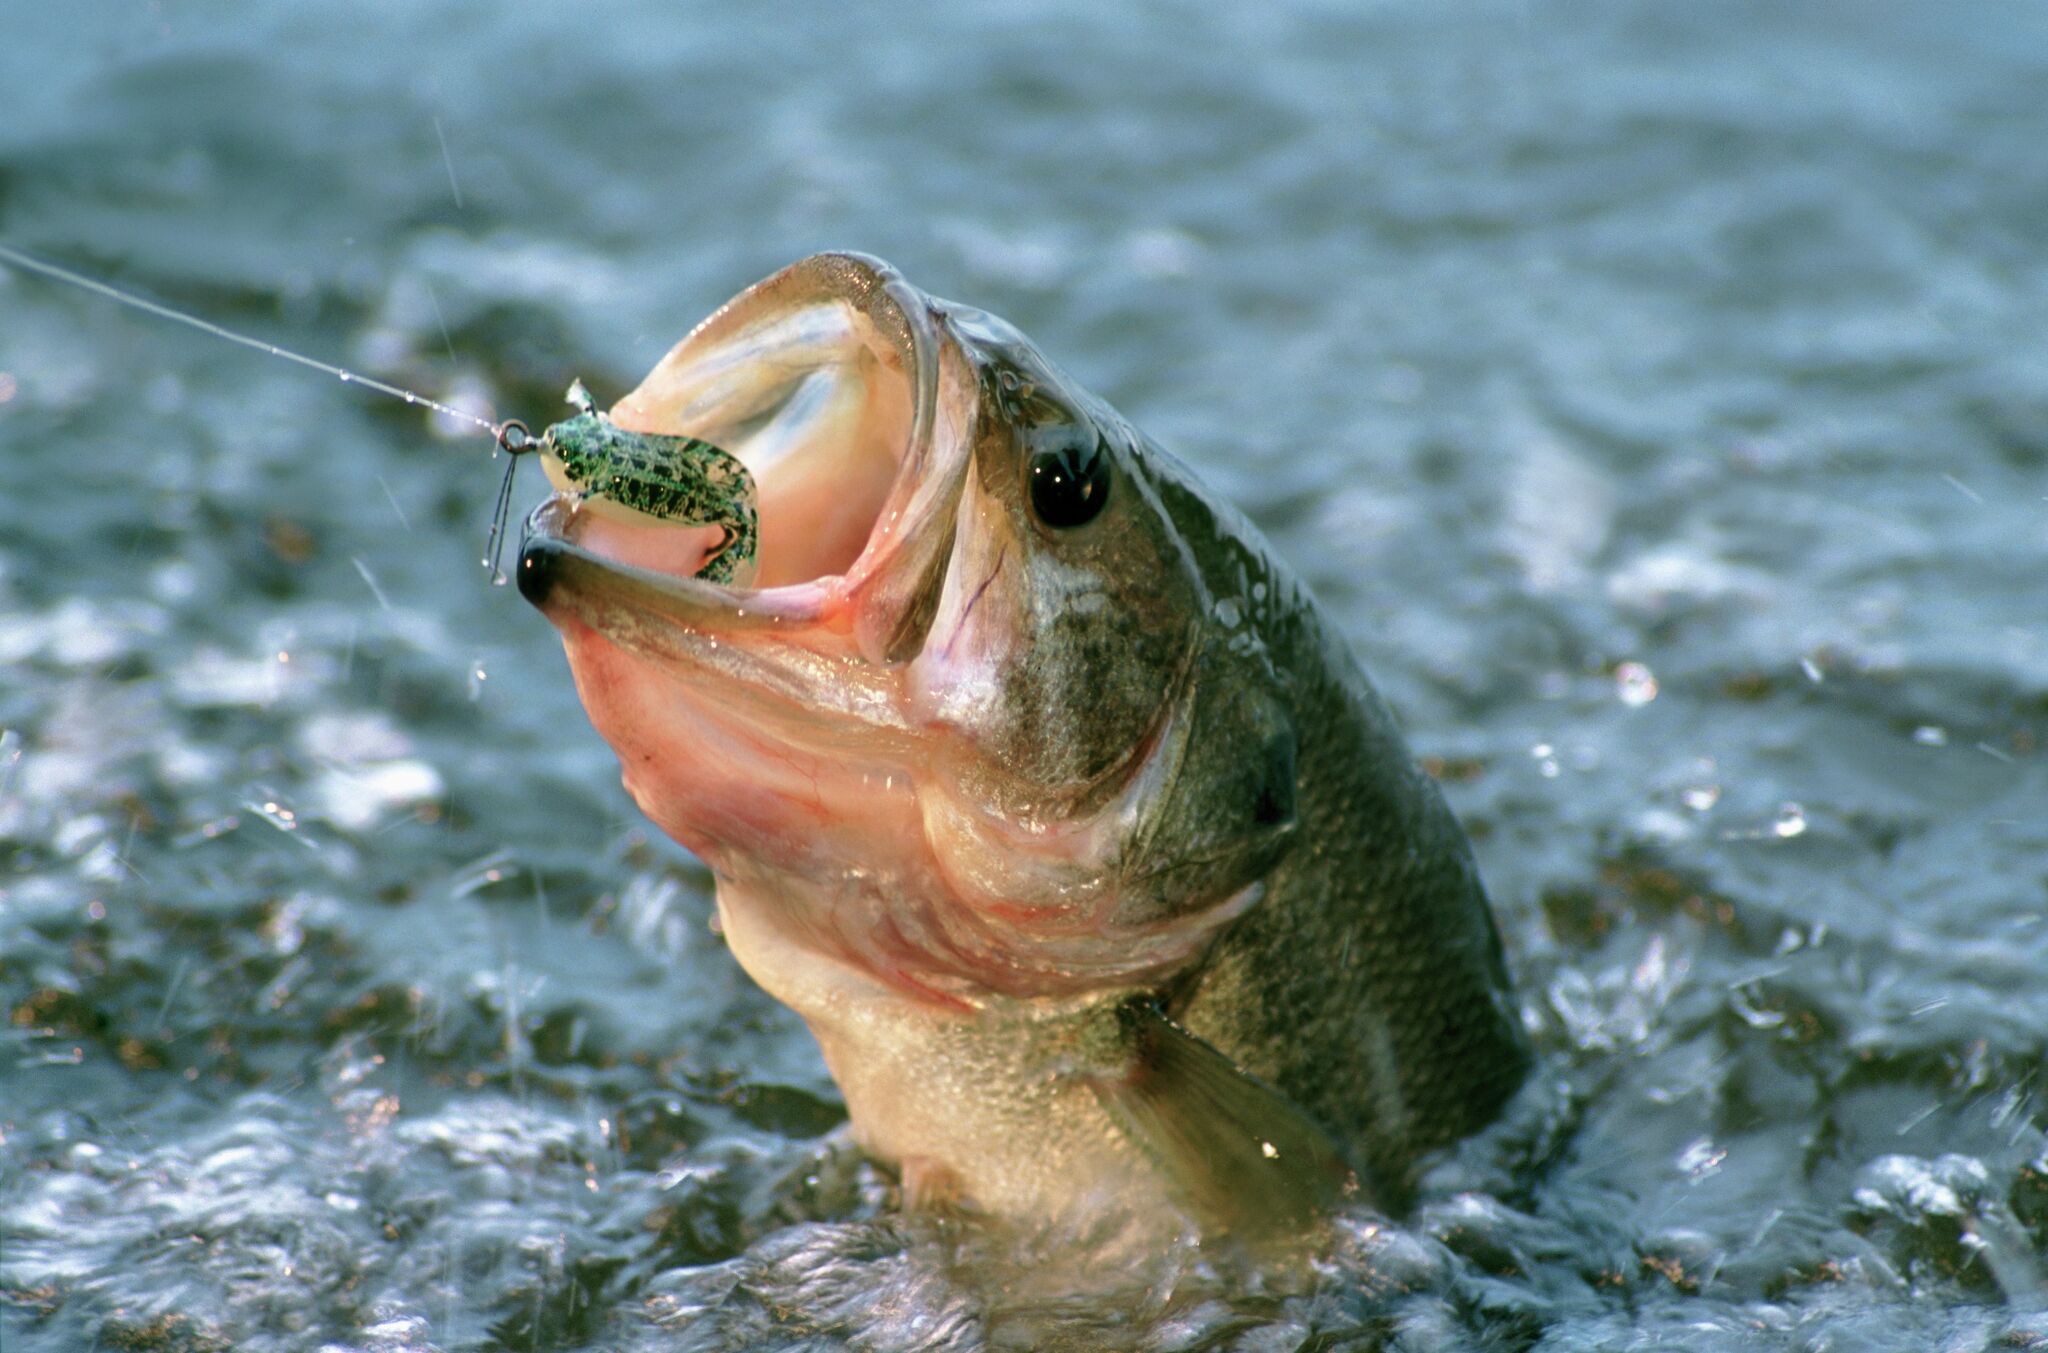 Texas lake tops best places in the nation to fish for bass